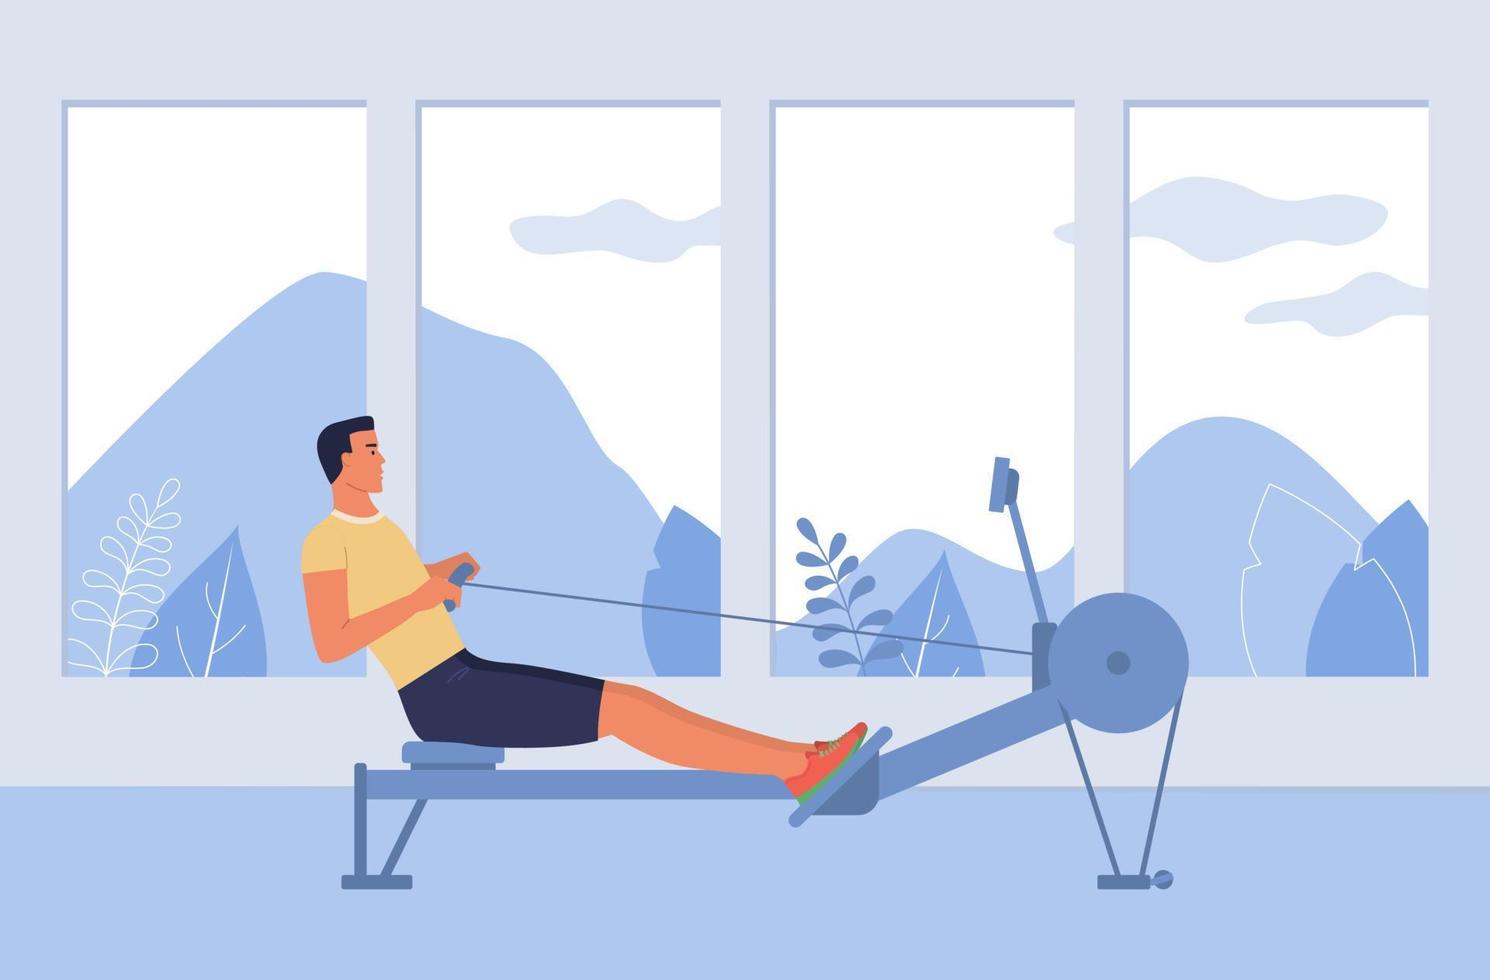 A man is engaged in a rowing simulator in the gym, the concept of preparing for rowing competitions. Vector illustration in flat design style.